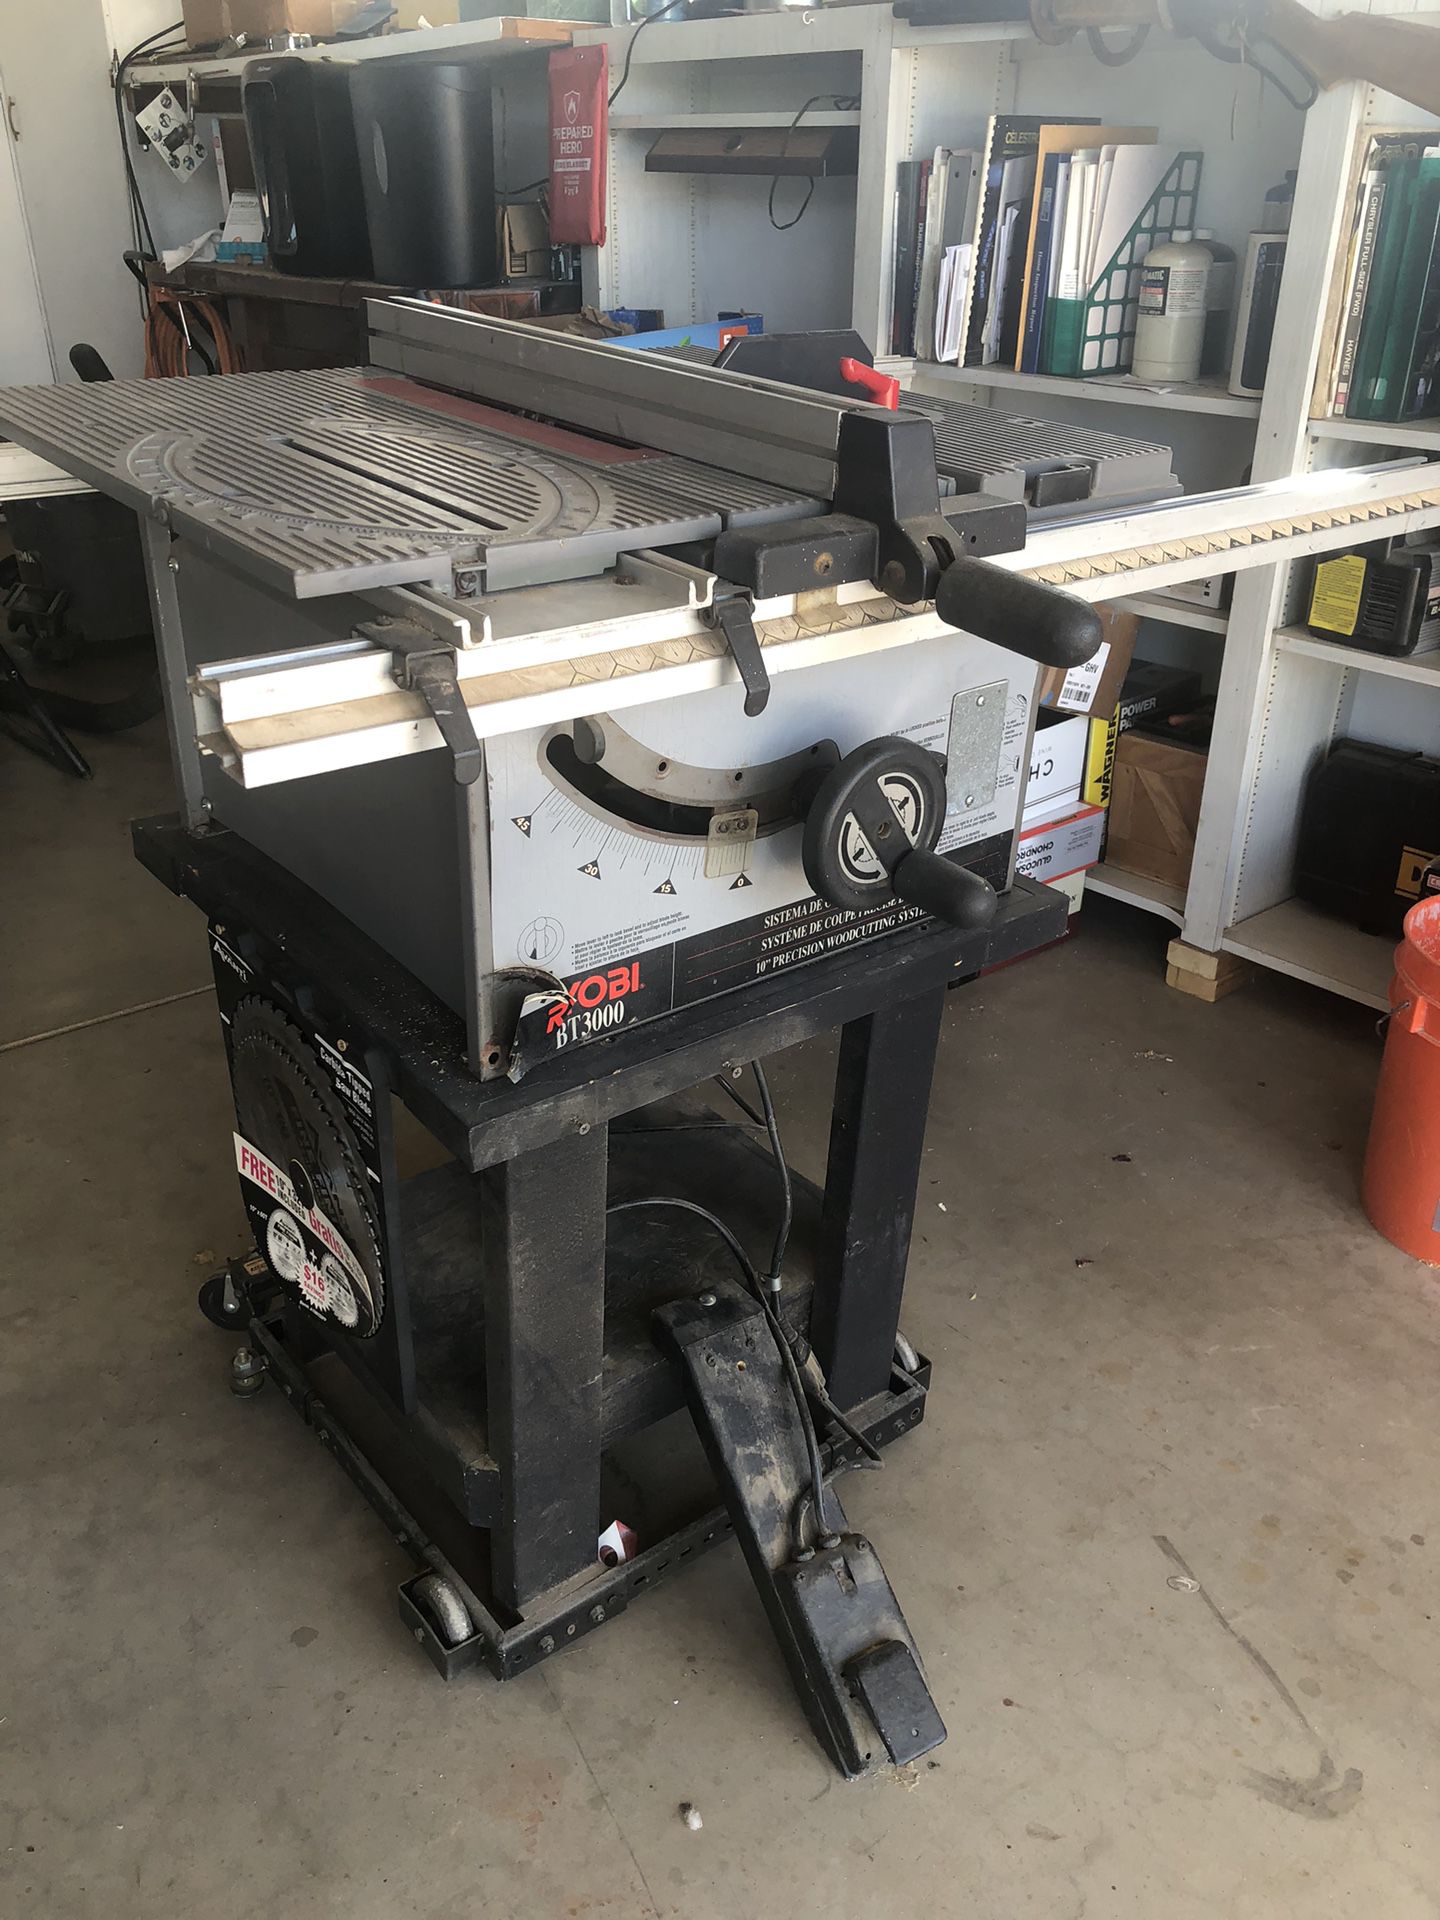 Ryobi Table Saw It’s Mounted On A Rolling Table With Locking Wheels